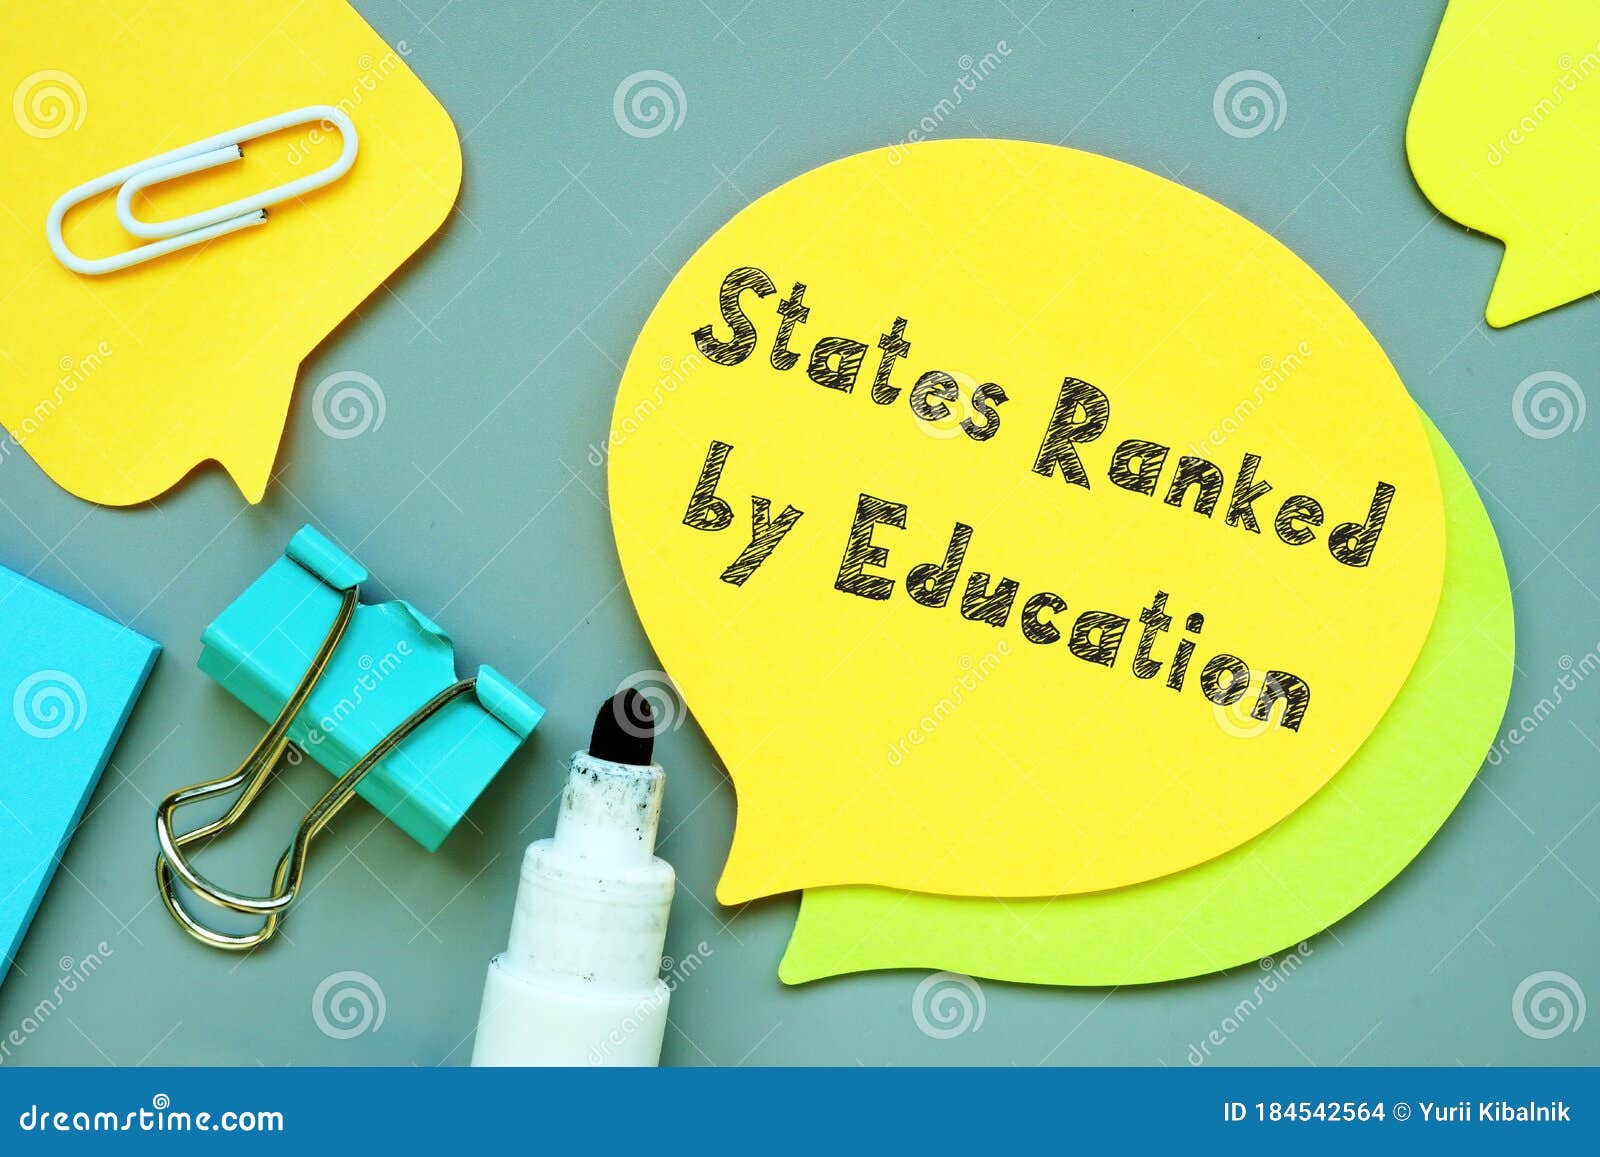 educational concept meaning states ranked by education with inscription on the sheet